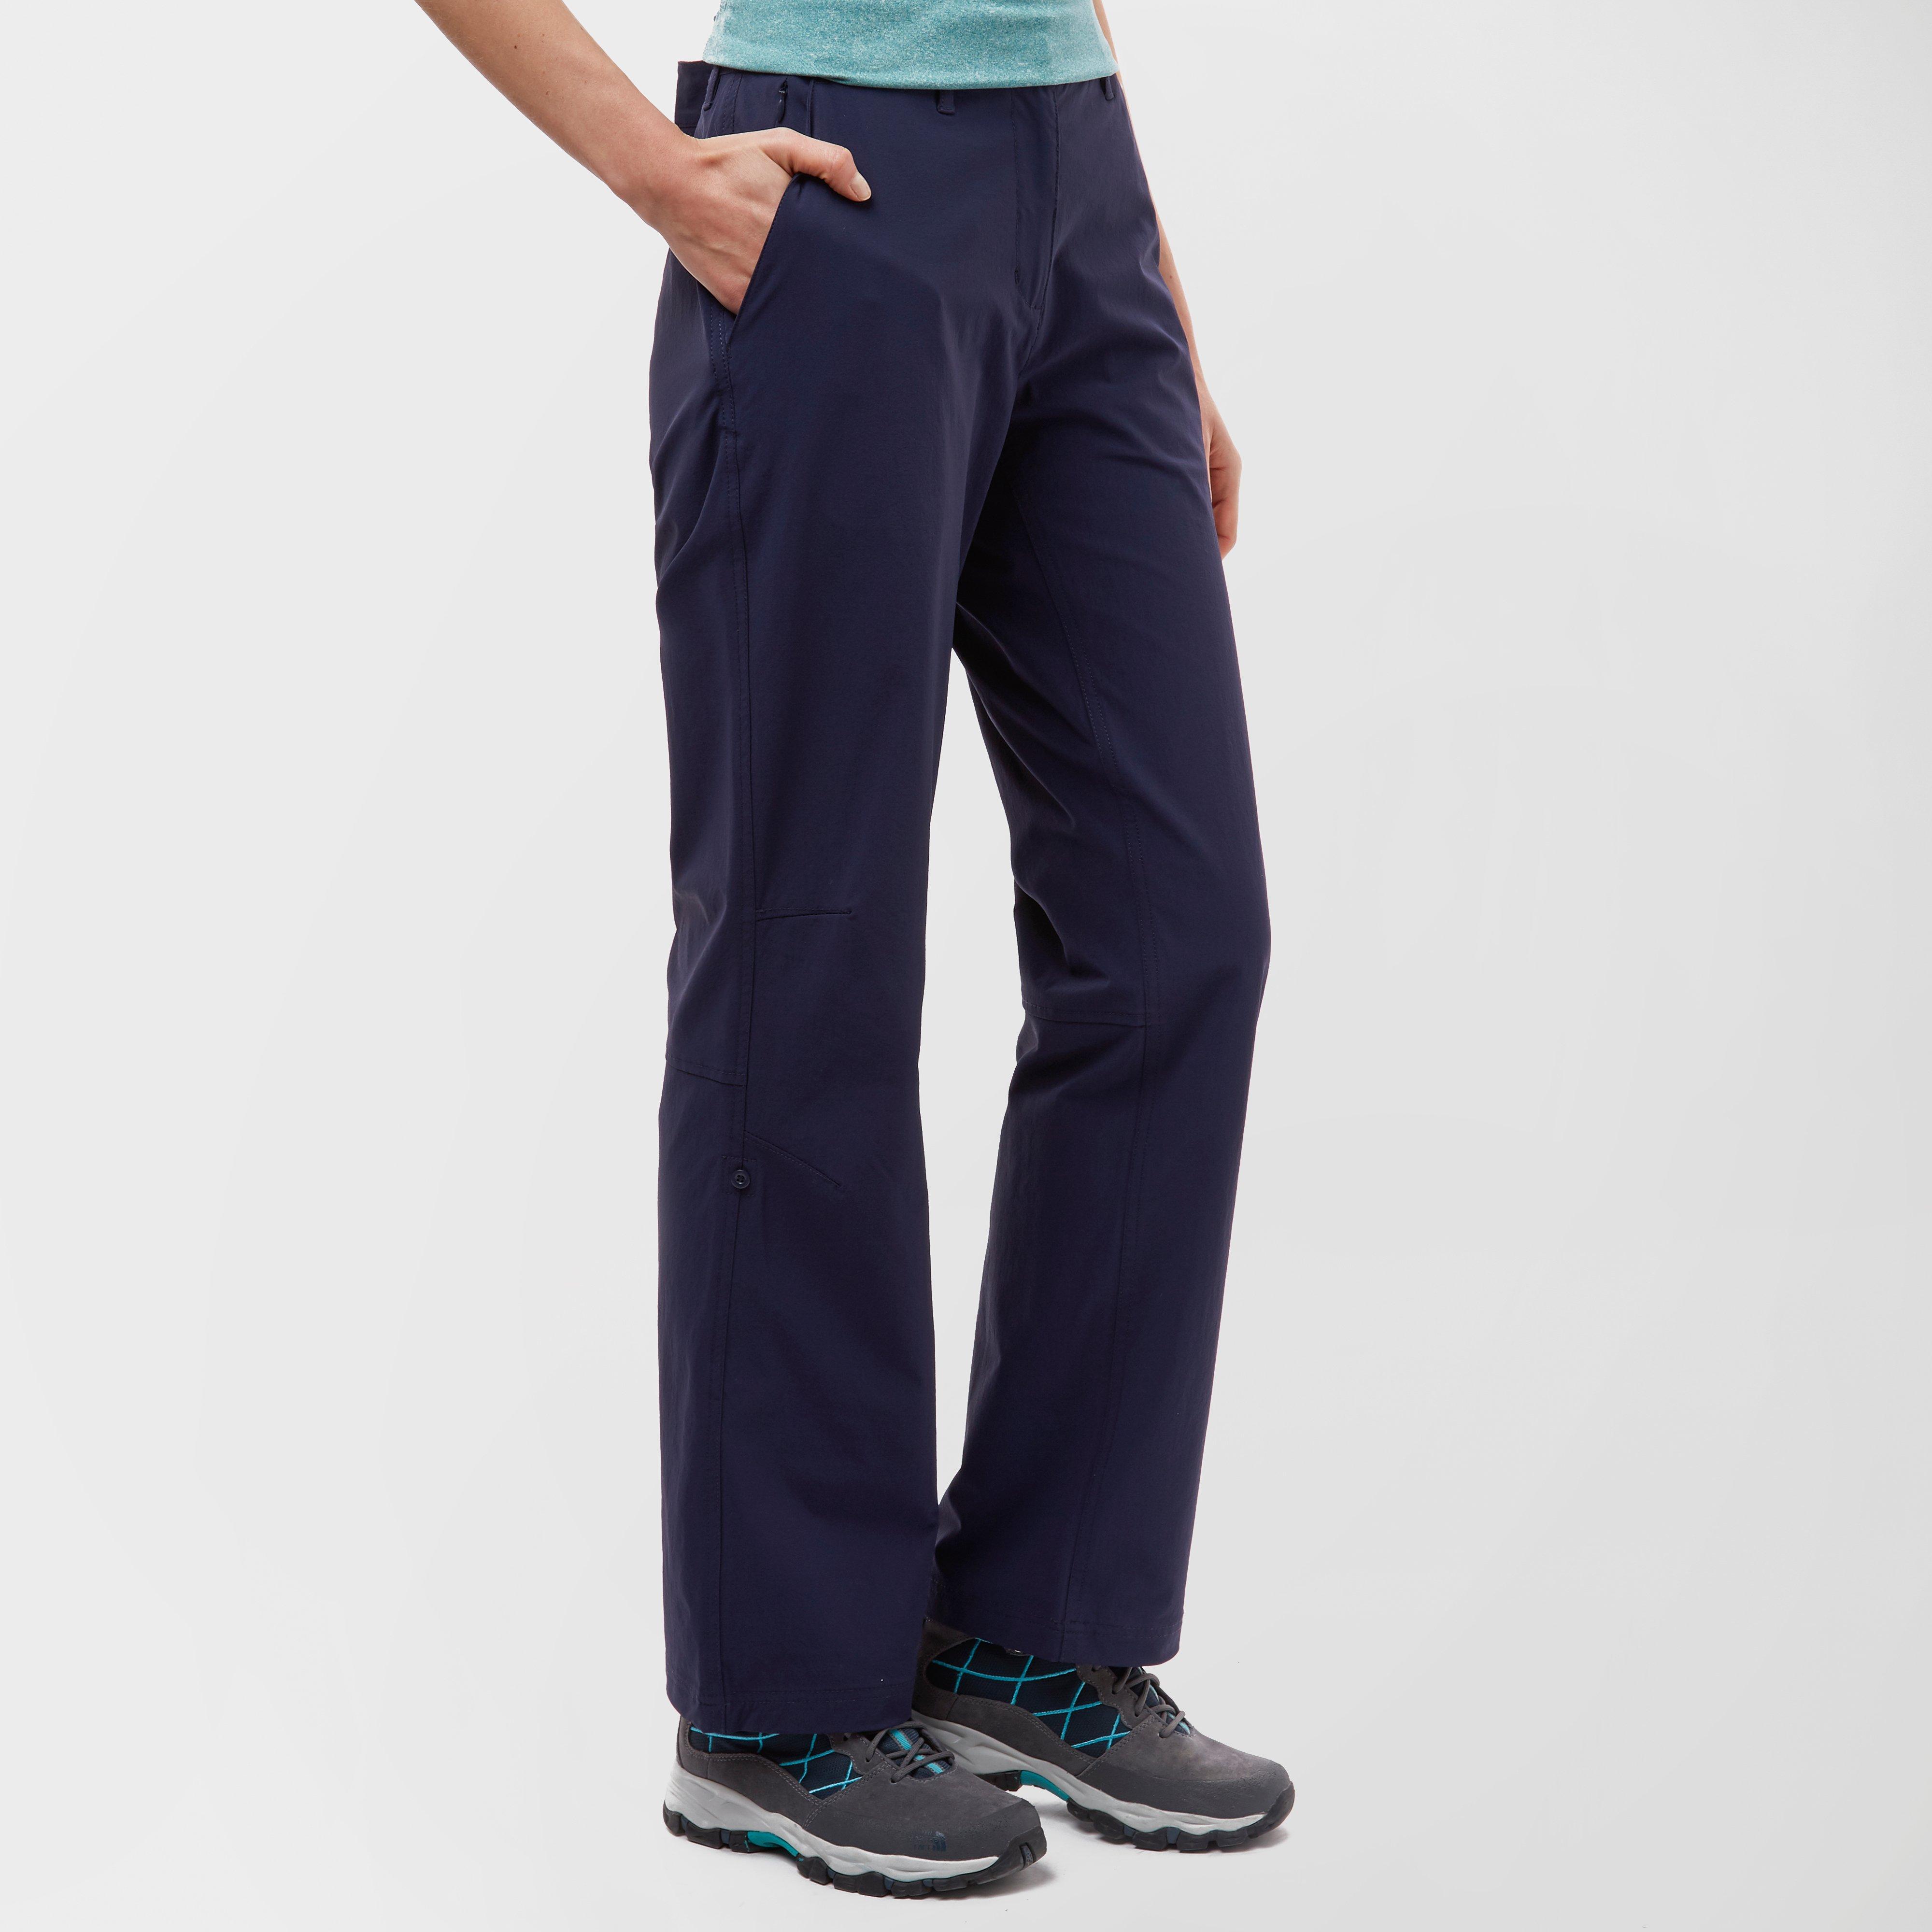 Peter Storm Womens Hike Stretch Roll-up Pant - Navy/nvy  Navy/nvy